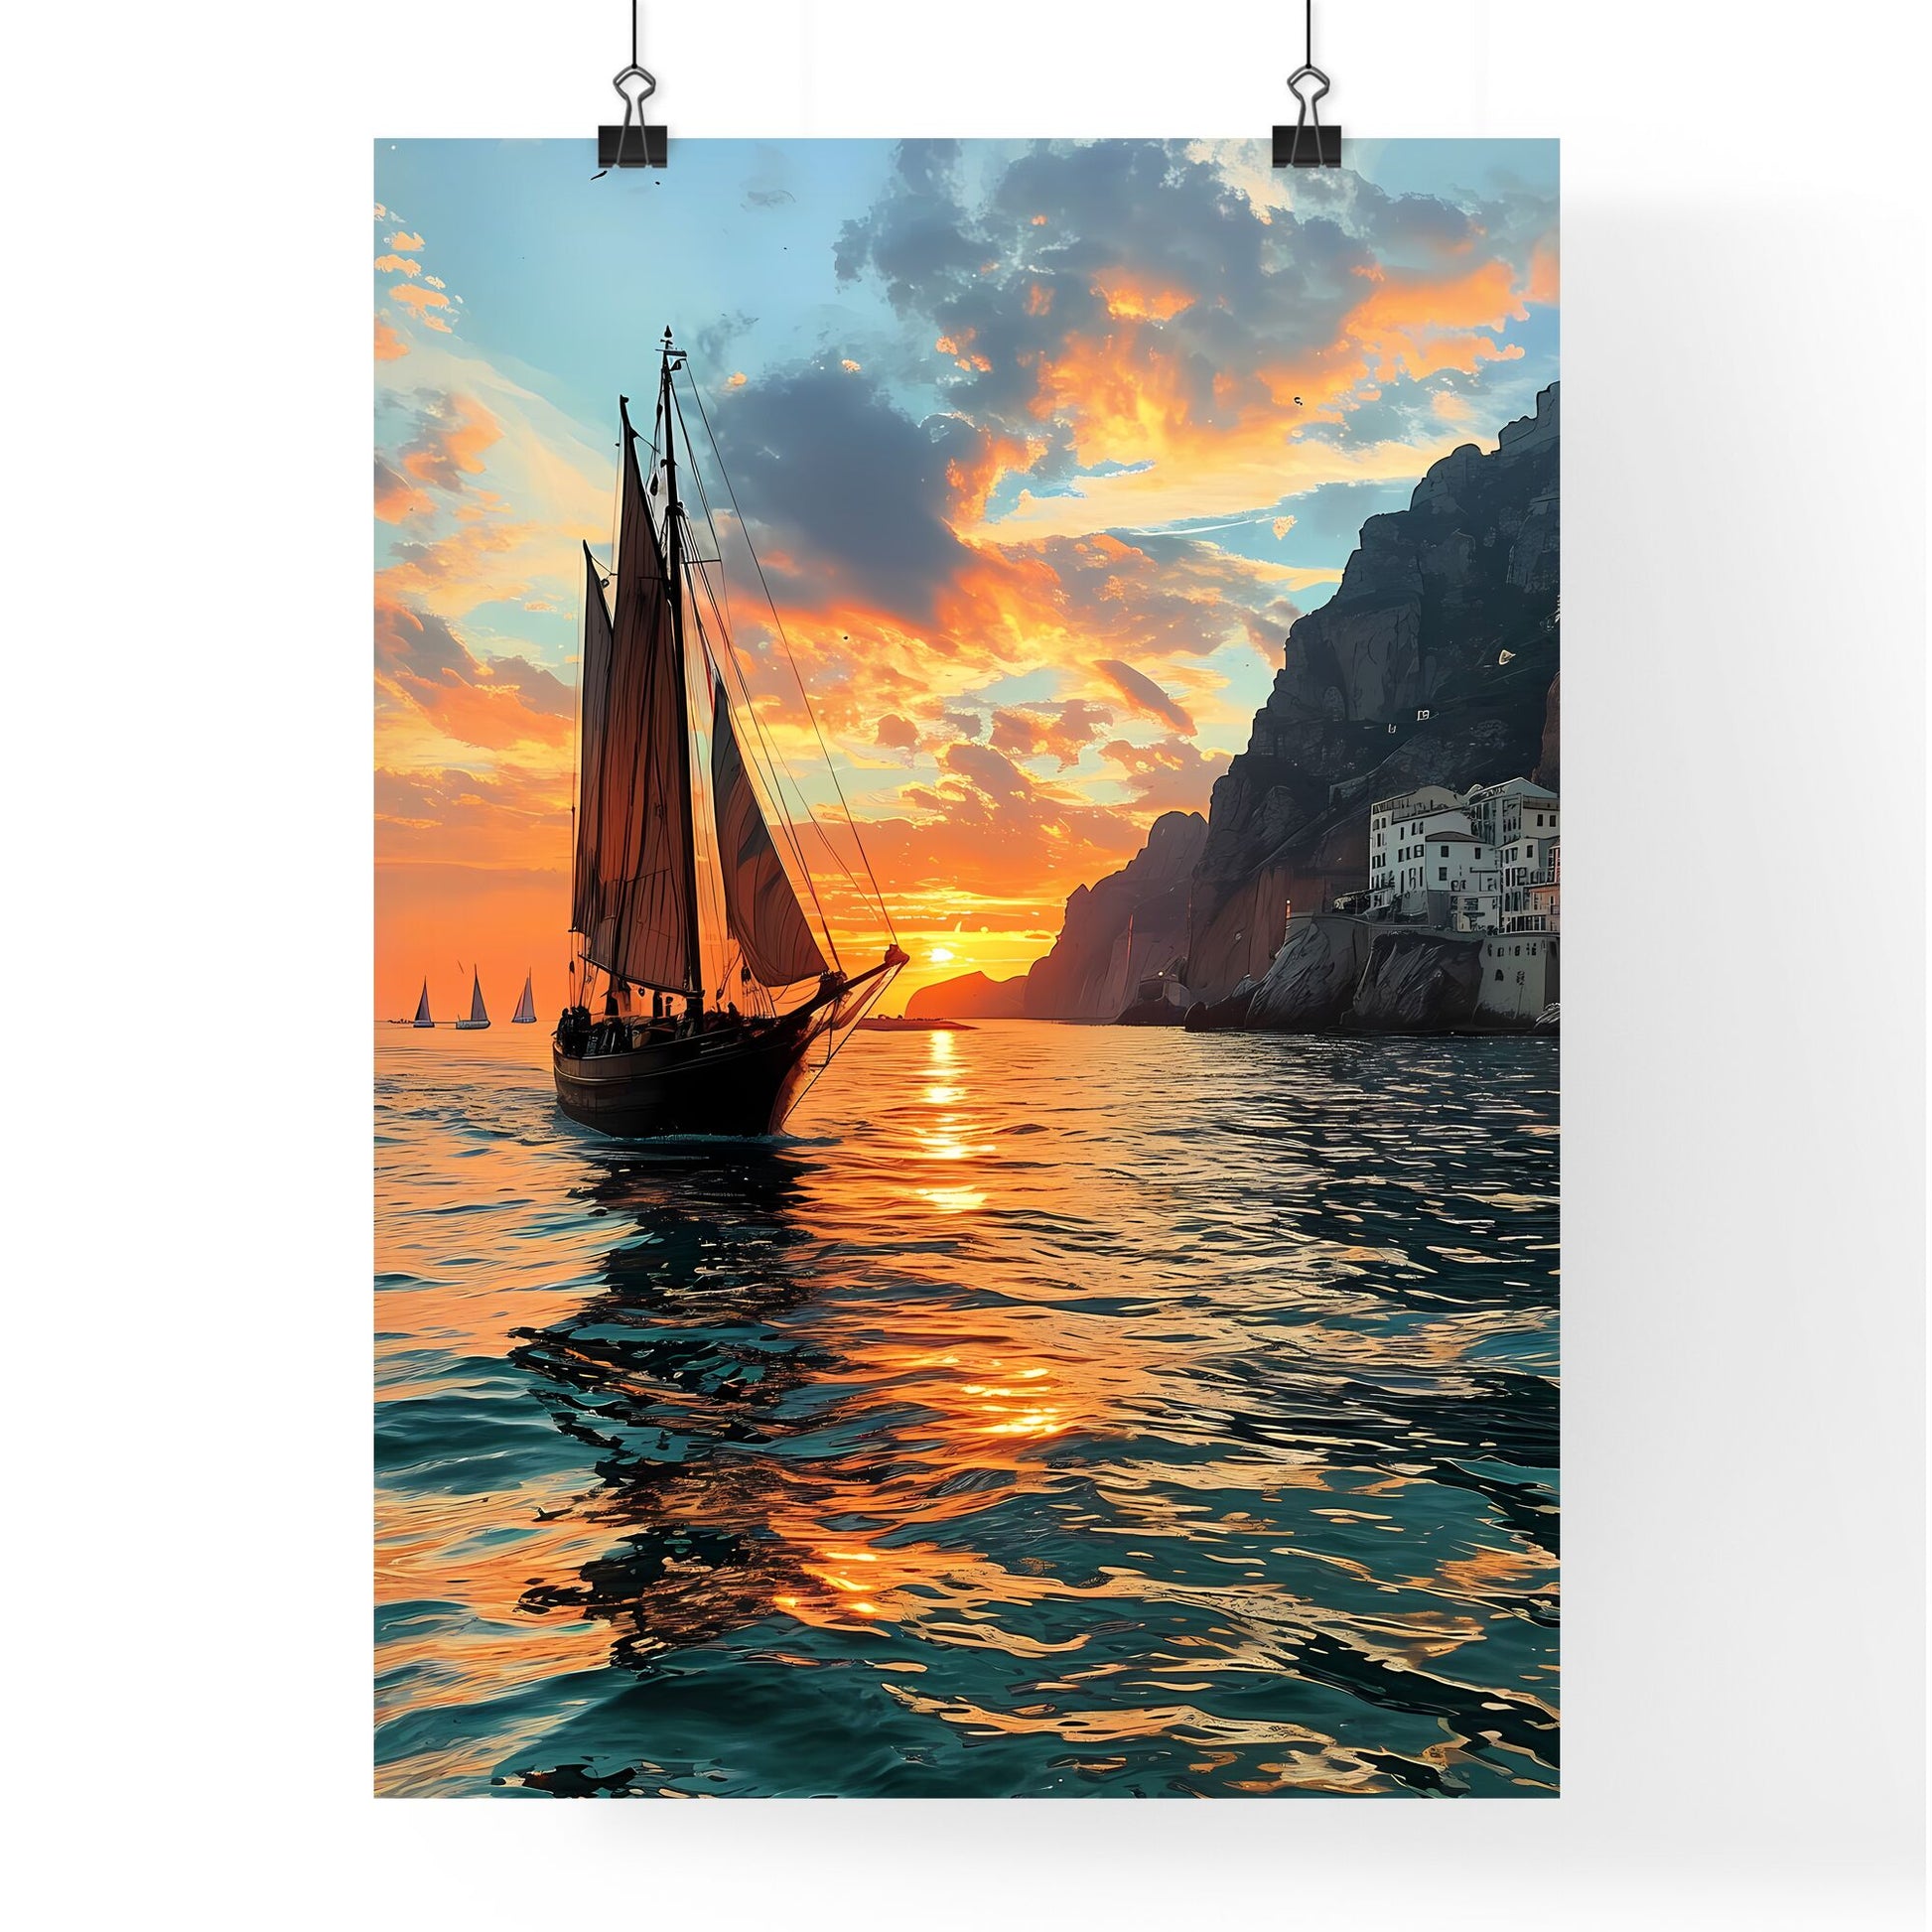 A Poster of fire - A Sailboat On The Water With A Sunset In The Background Default Title